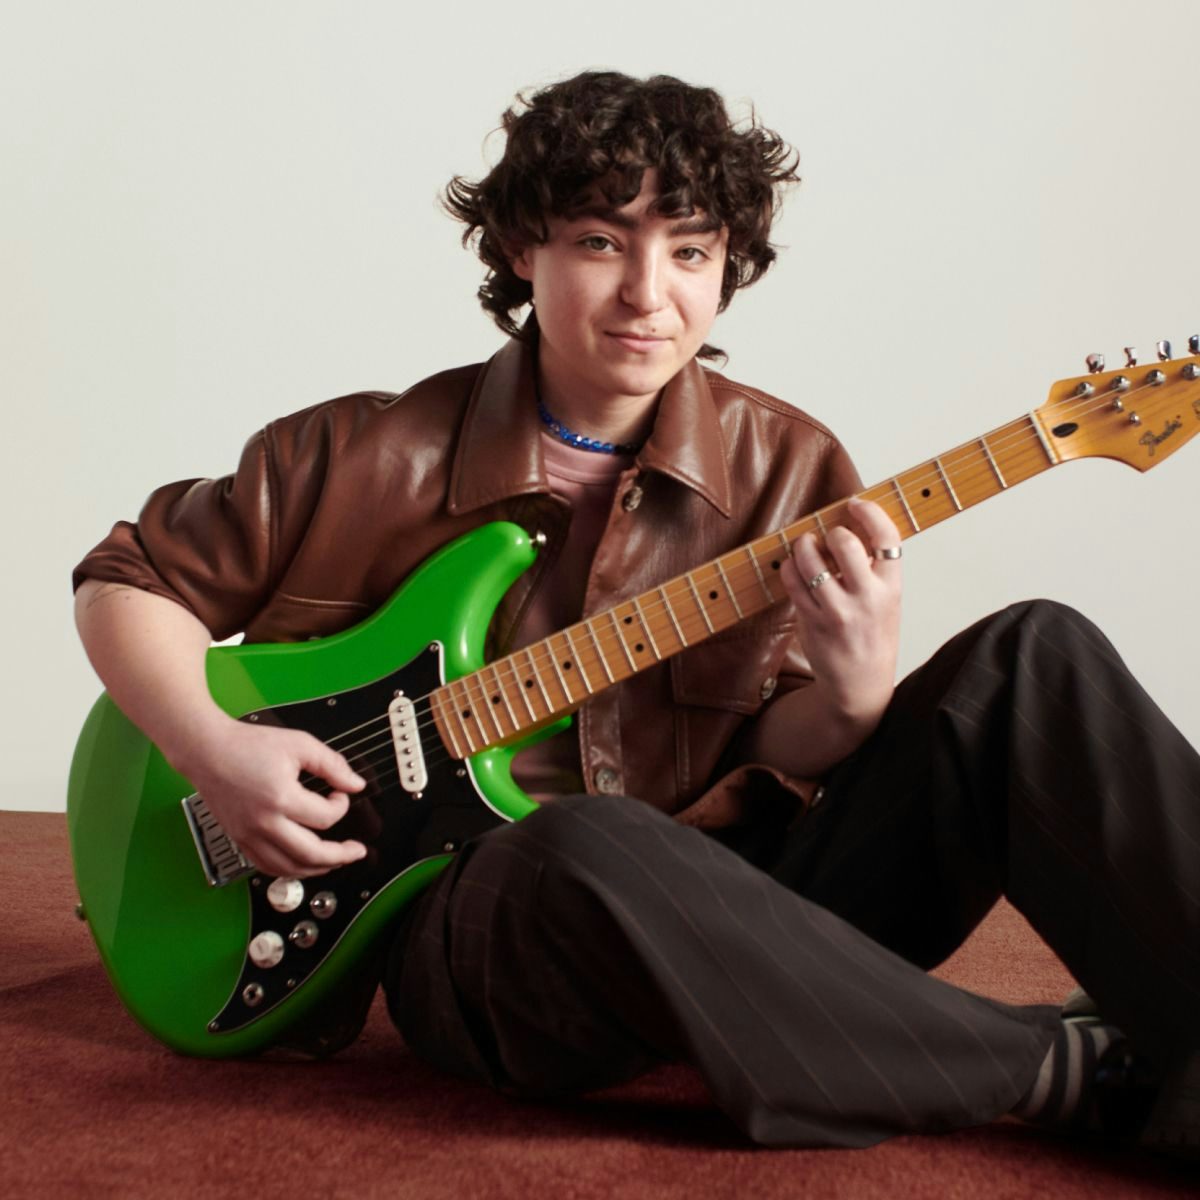 A portrait of Claud, looking at the camera with a smile, holding a green guitar